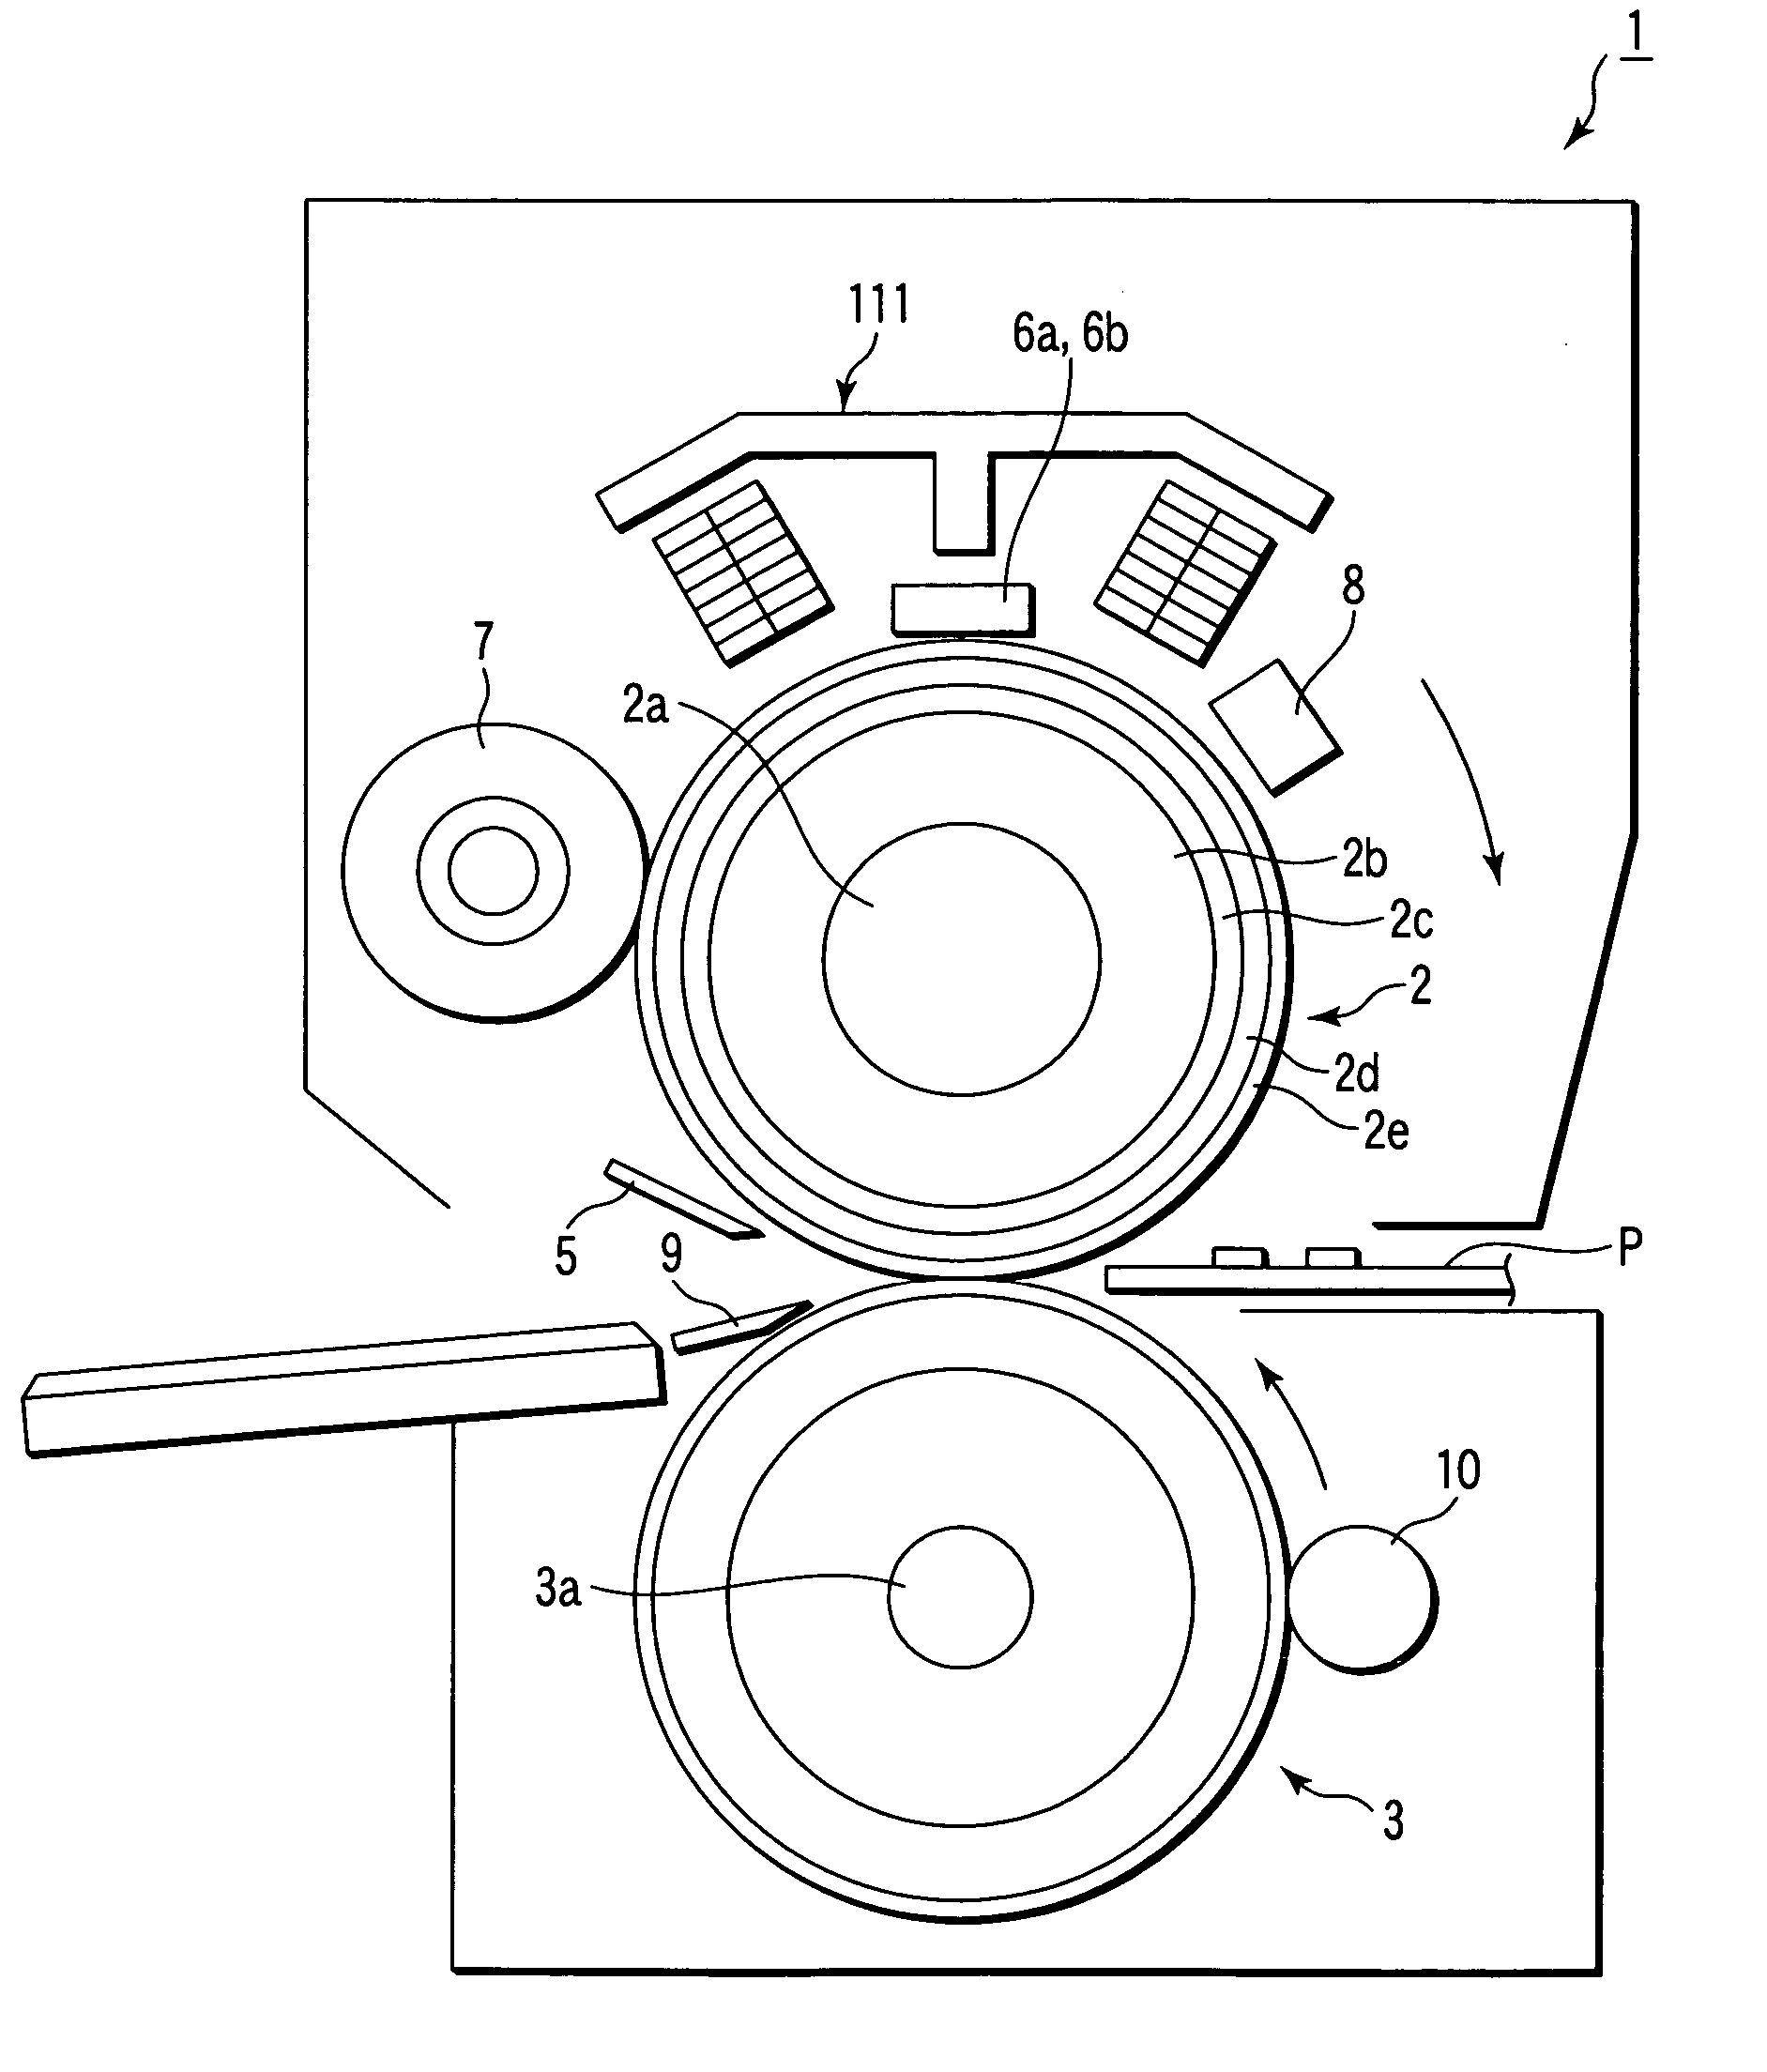 Apparatus for fixing toner on transferred material